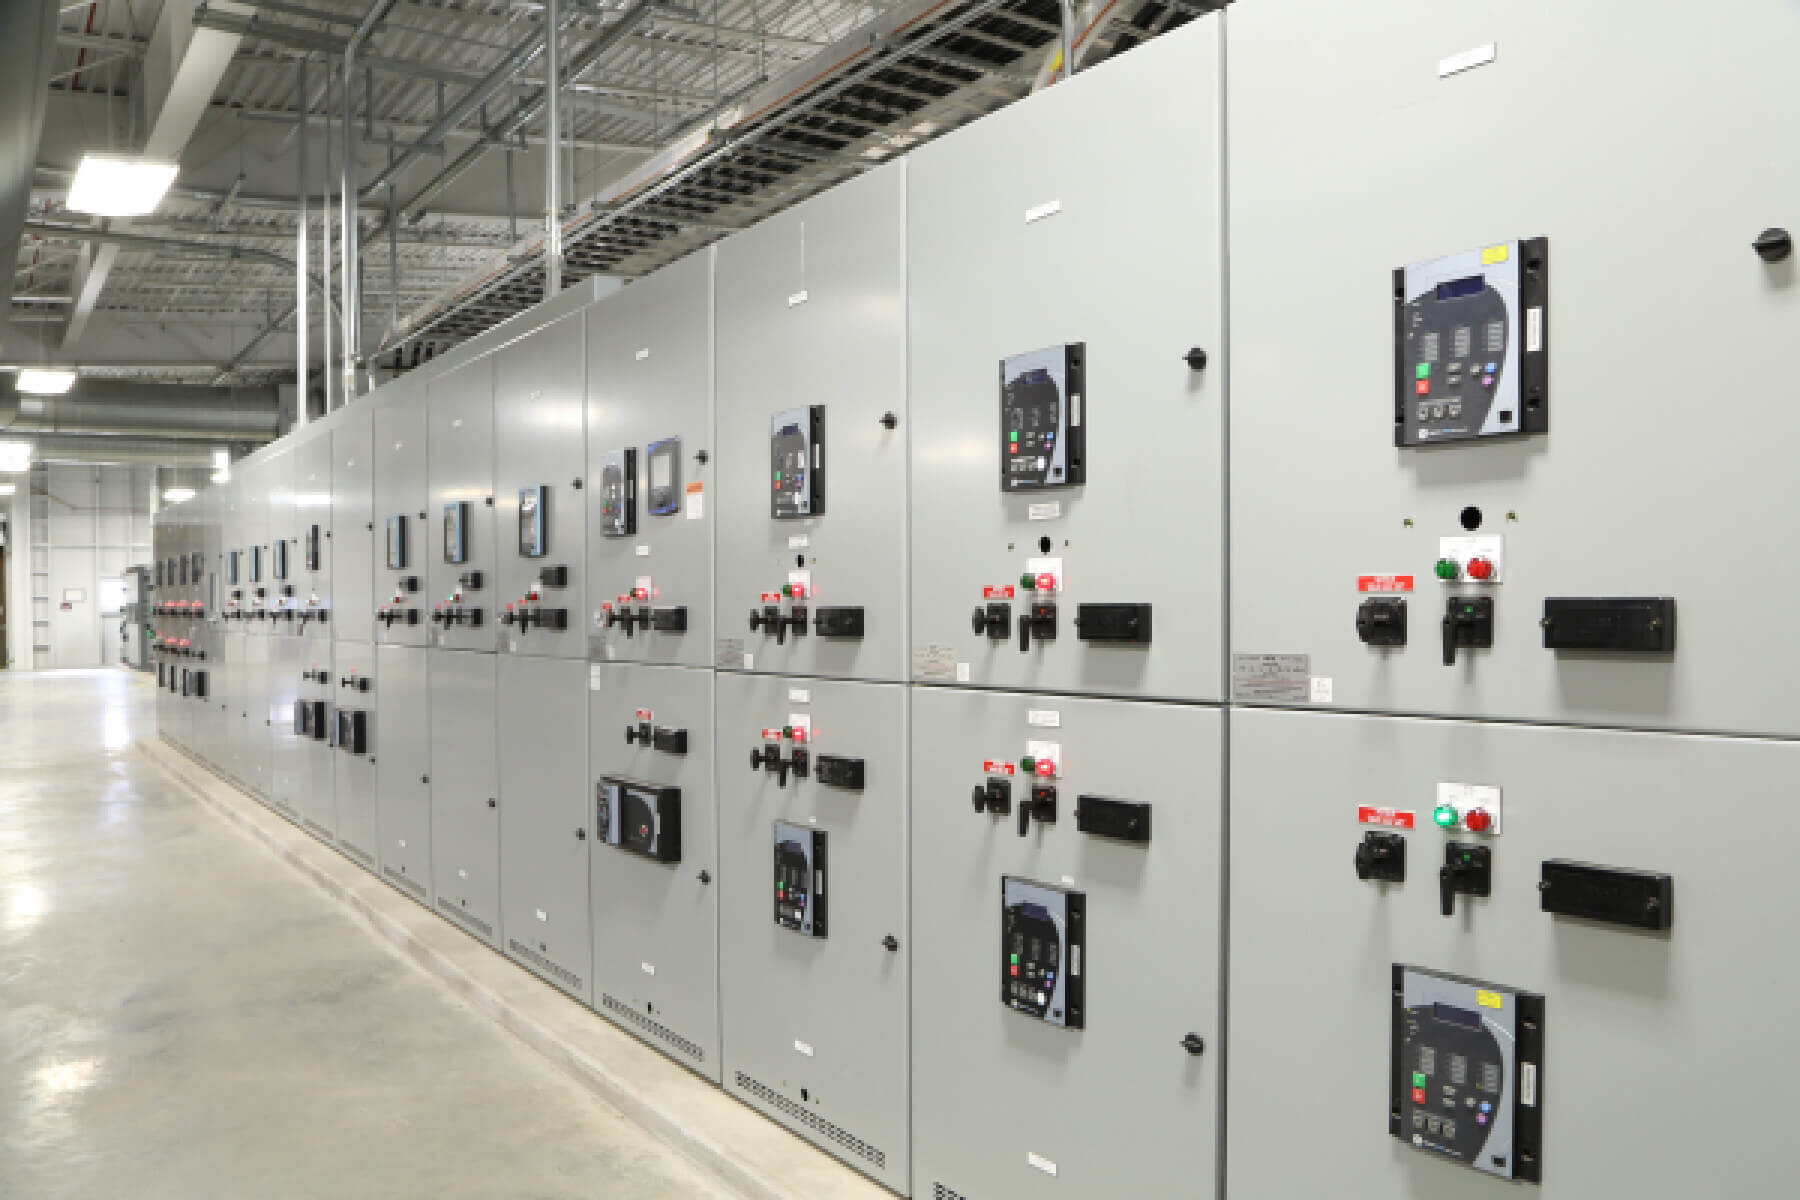 Picture of switchgear and variable frequency drives on the second floor of K.R. Harrington Water Treatment Plant